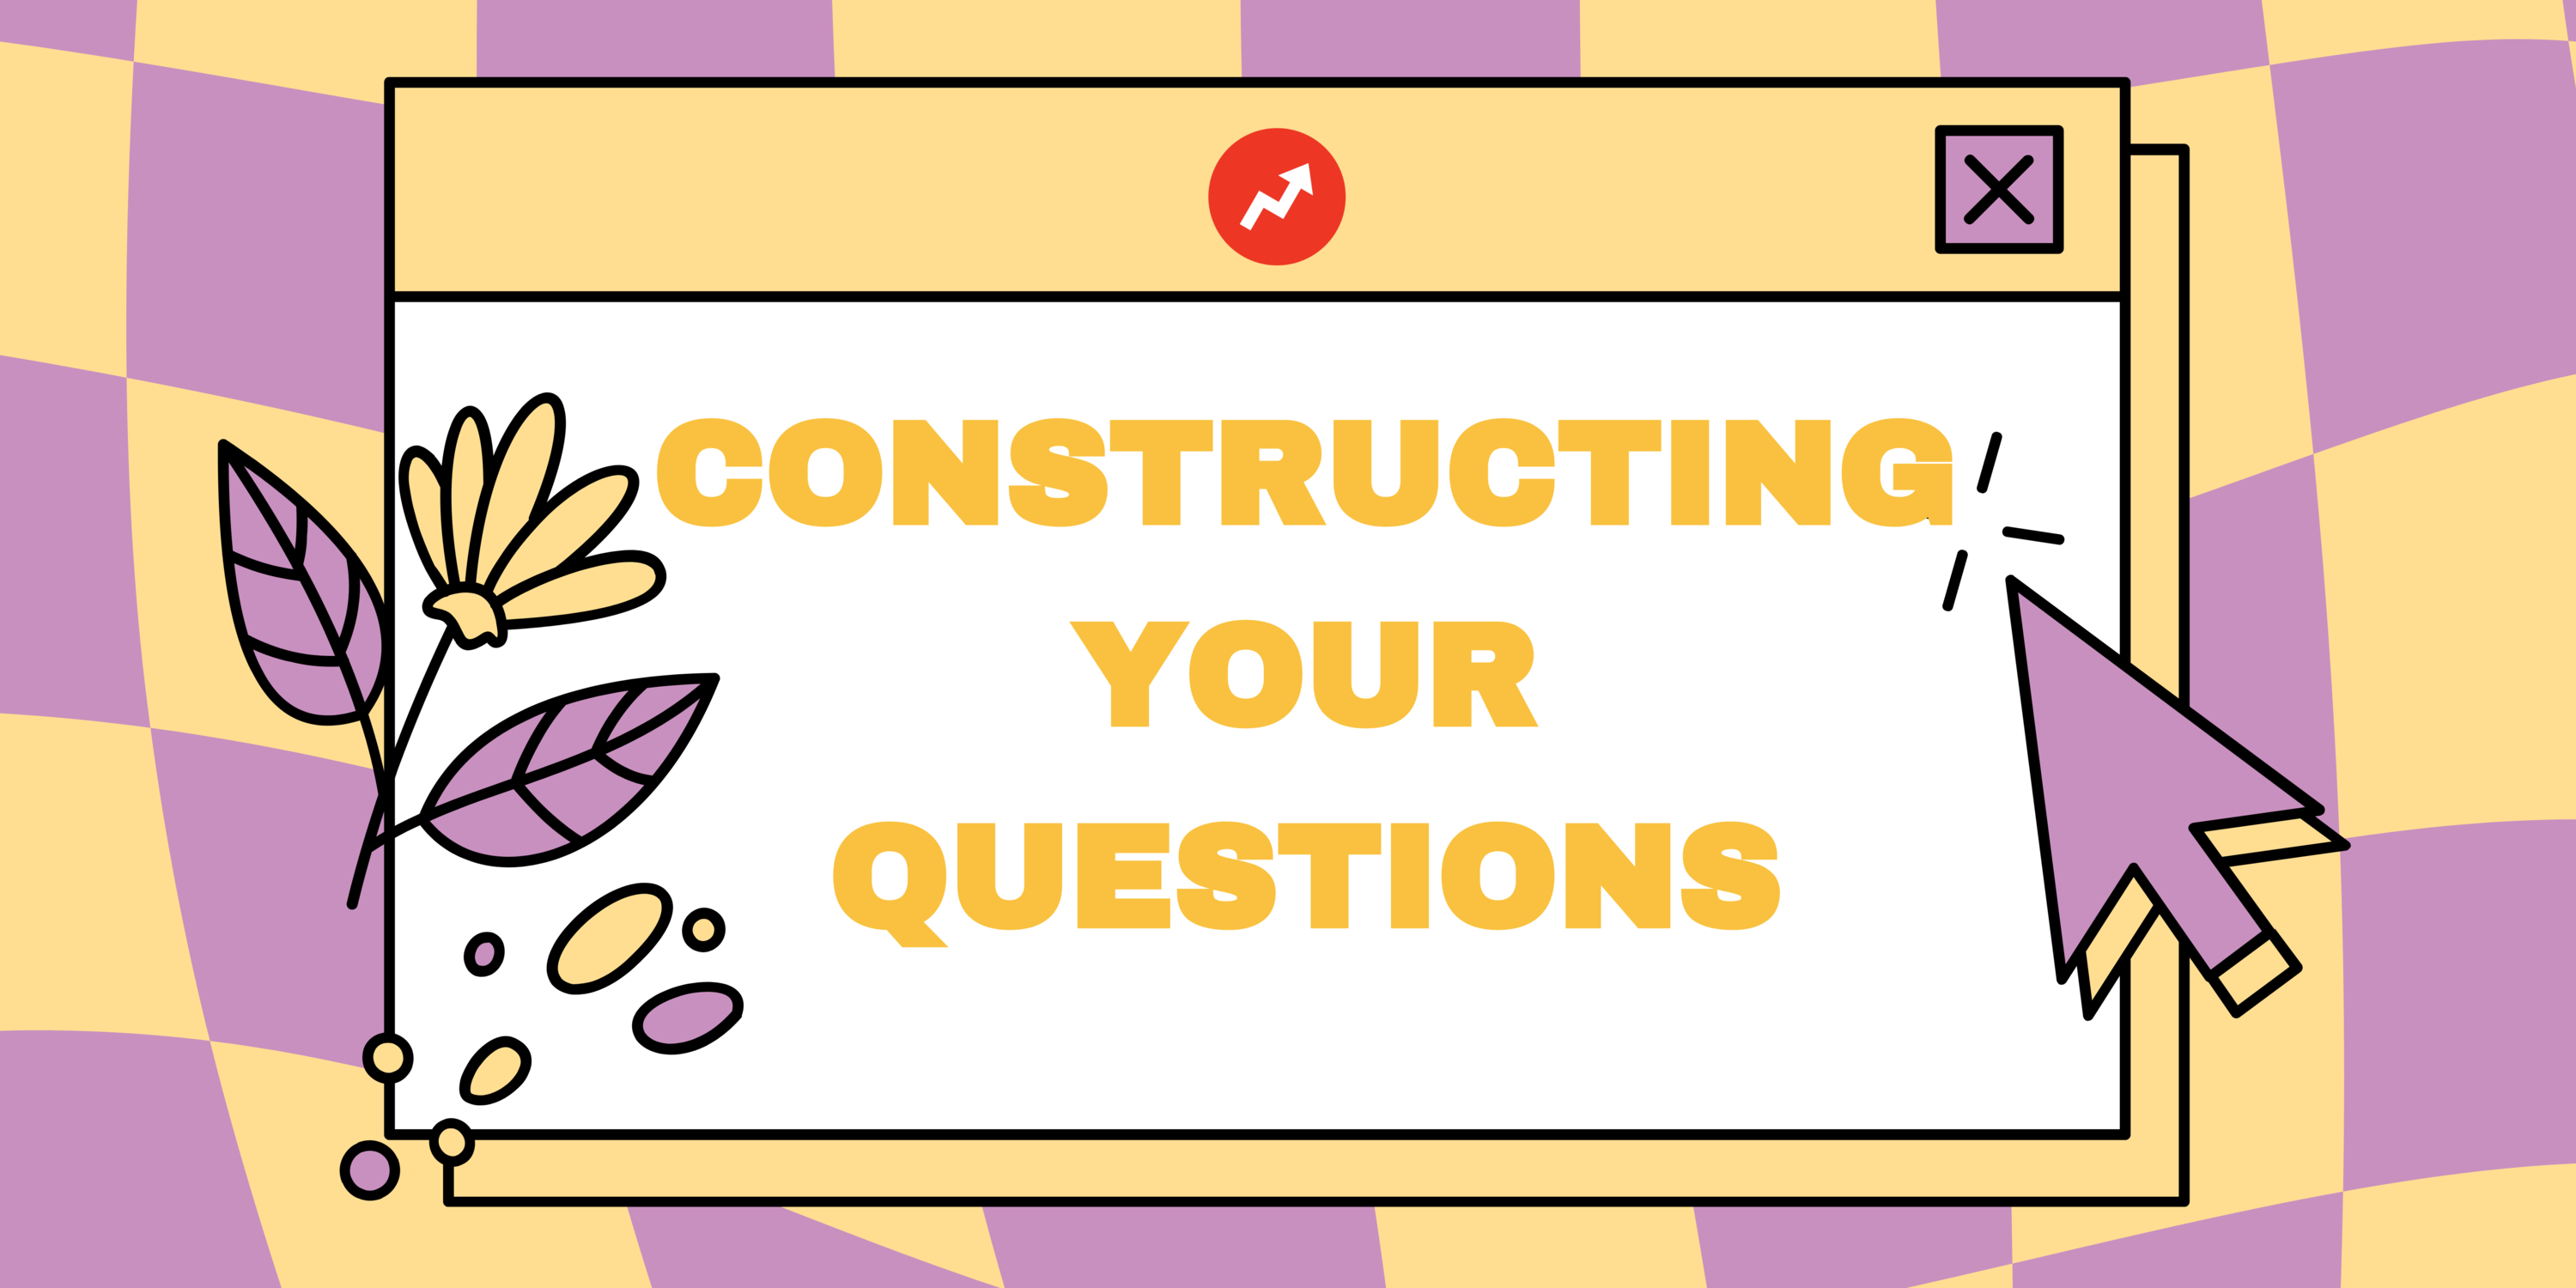 Constructing your questions.